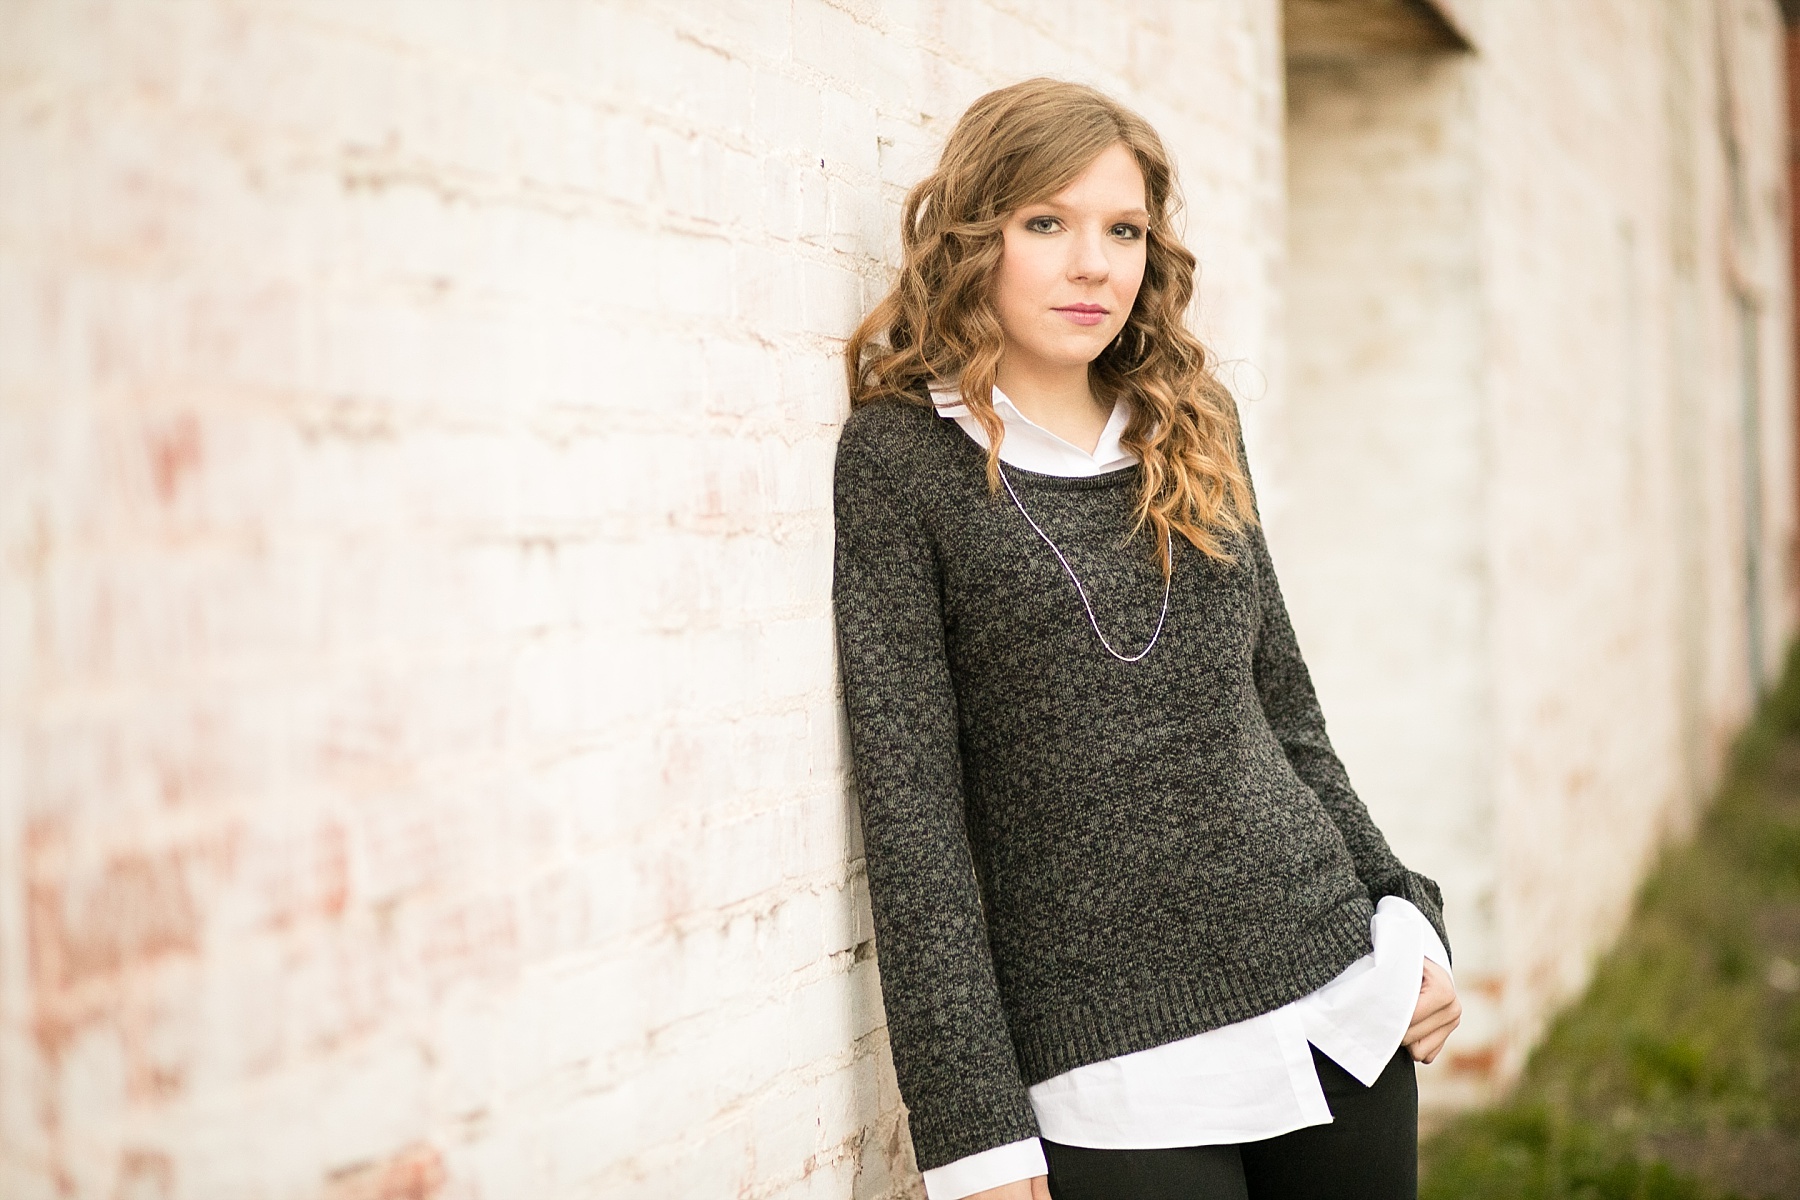 Haley's Eau Claire senior photos were the perfect mix of summer bleeding over into fall.